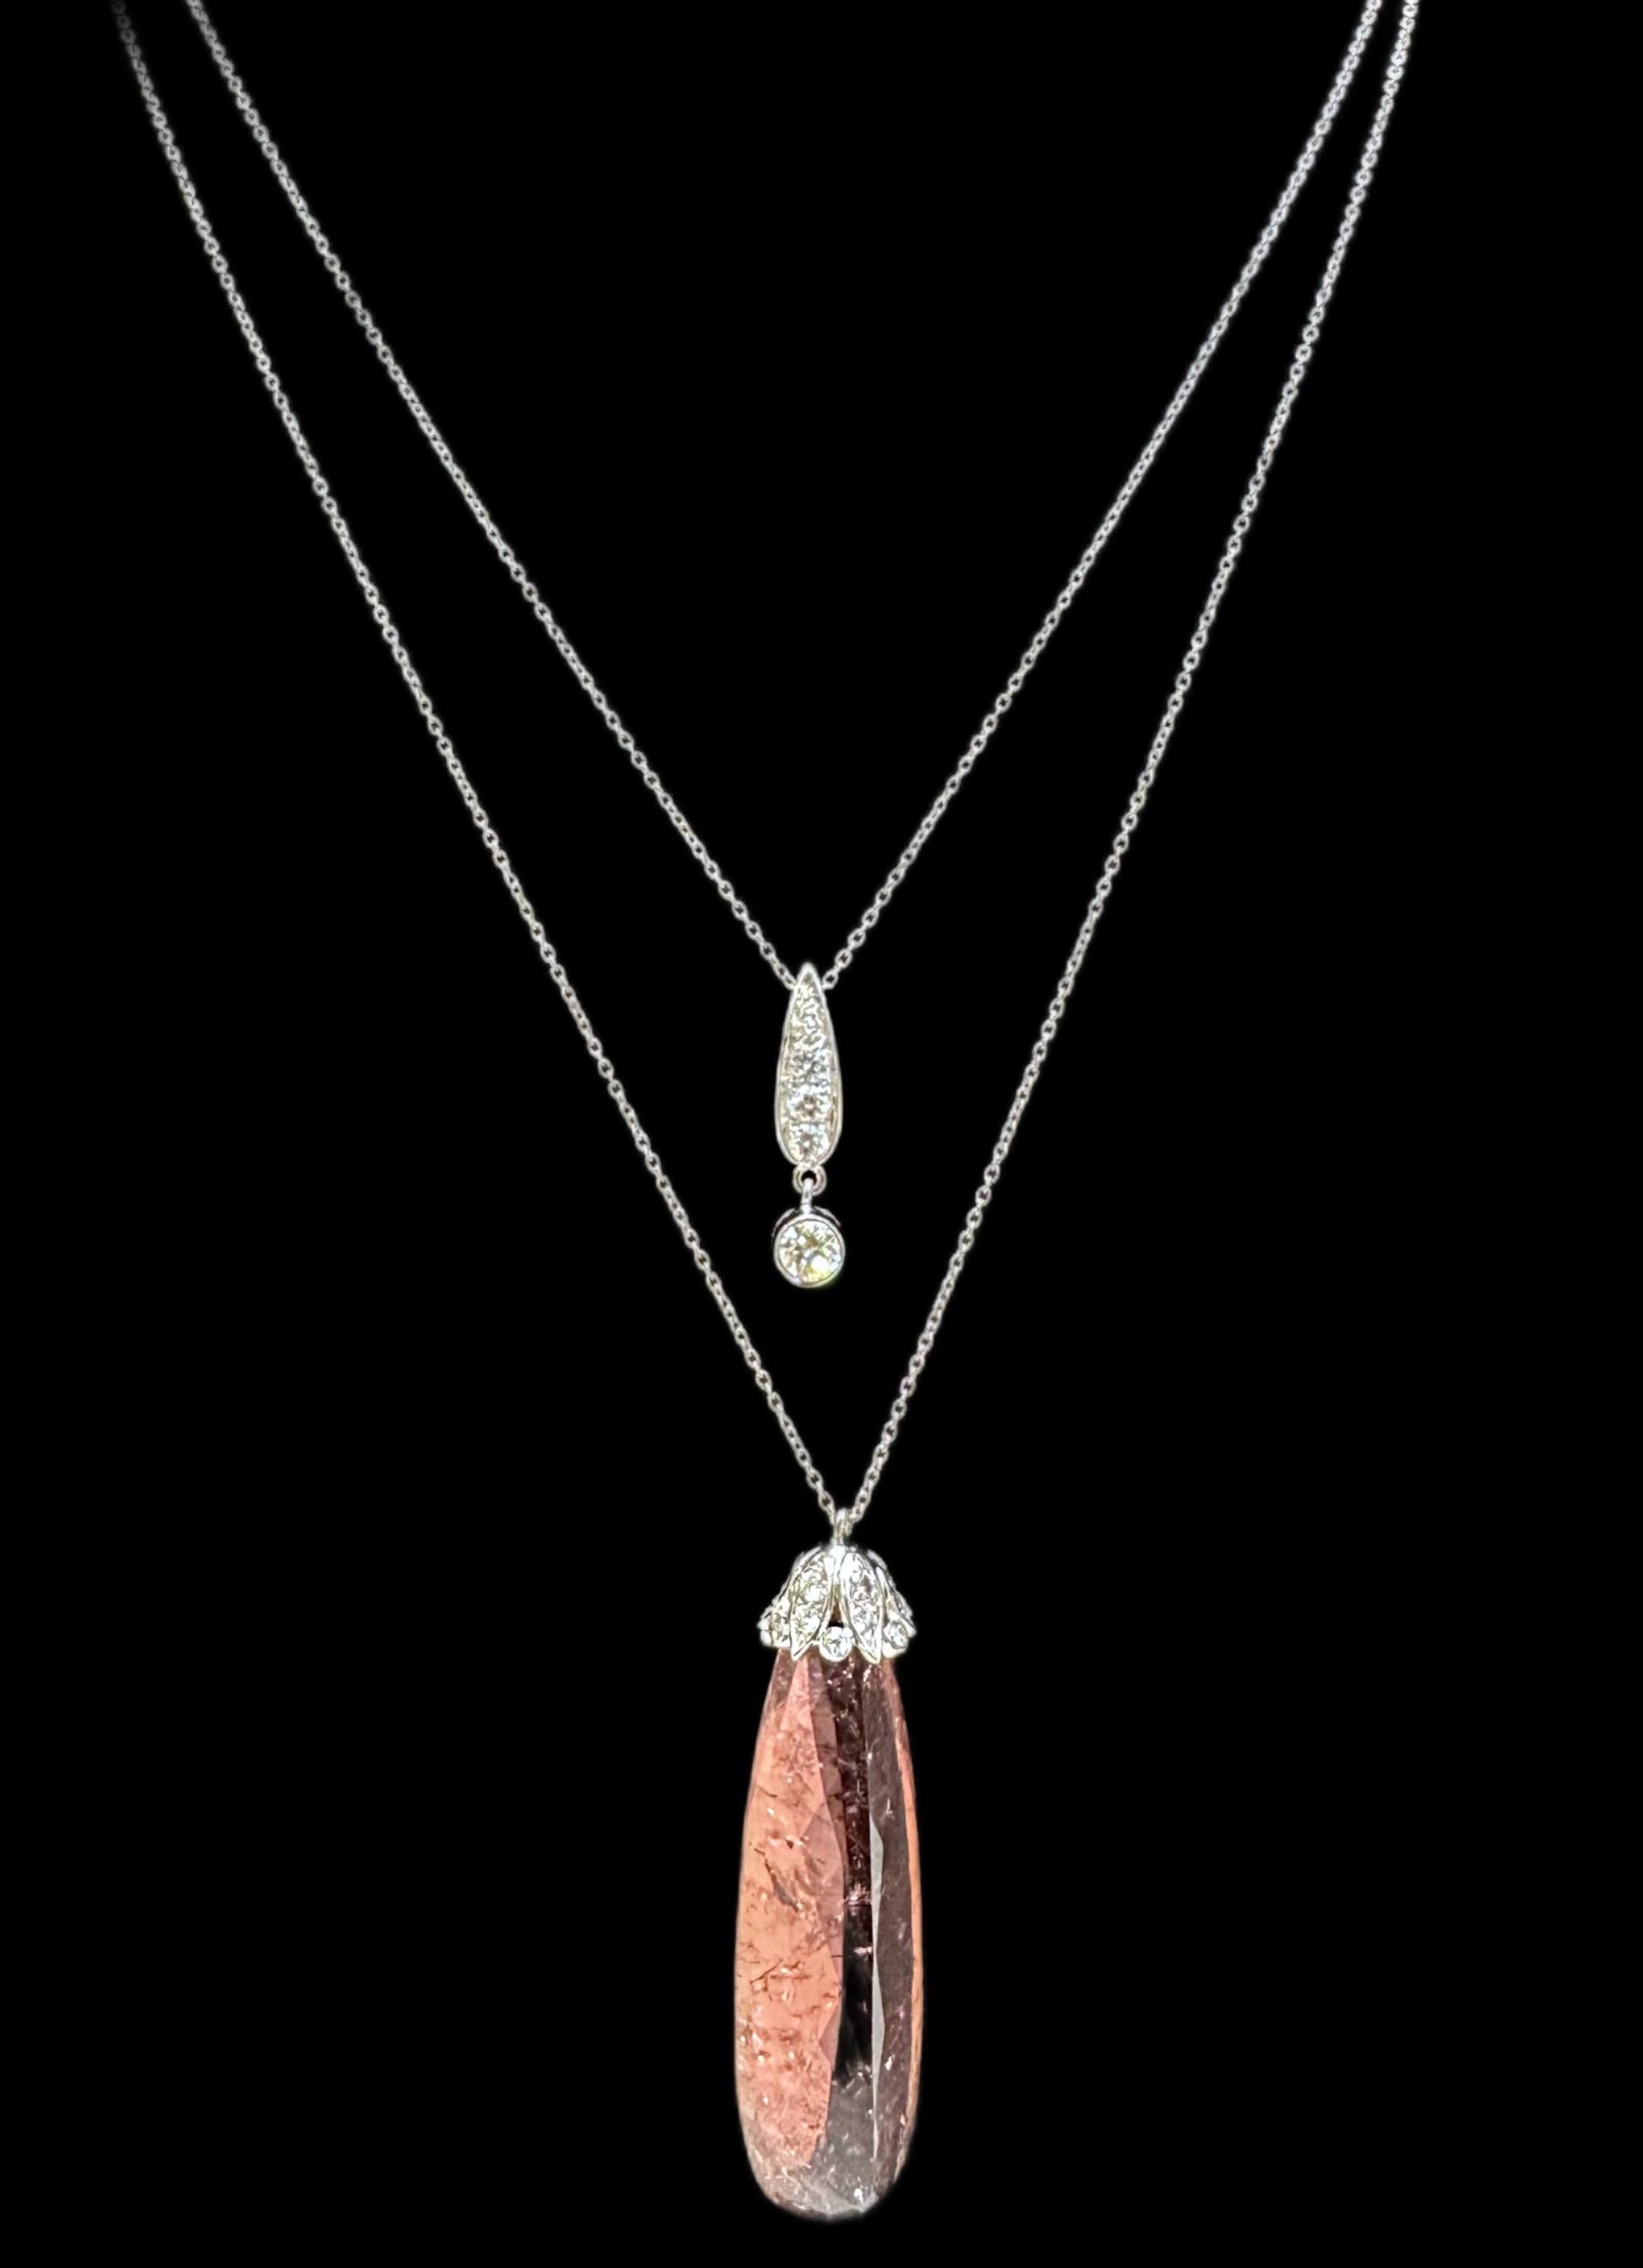 This diamond capped rose hued tourmaline necklace is the perfect alternative for those looking to shy away from the traditional red this Valentine's Day. 